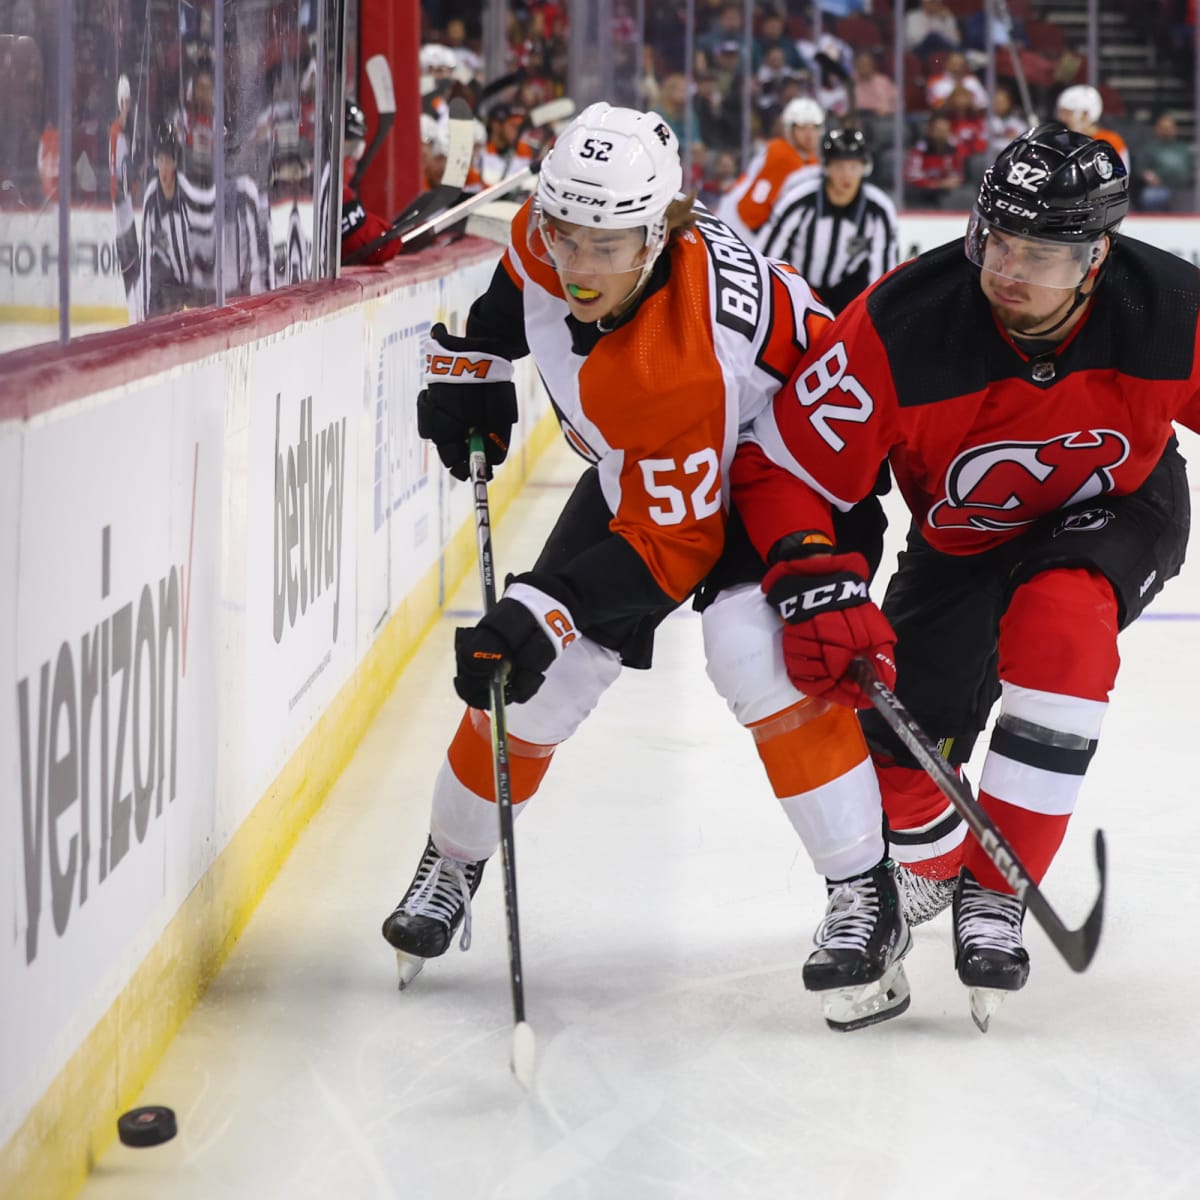 Key takeaways after Flyers take the ice in rookie game vs. Rangers